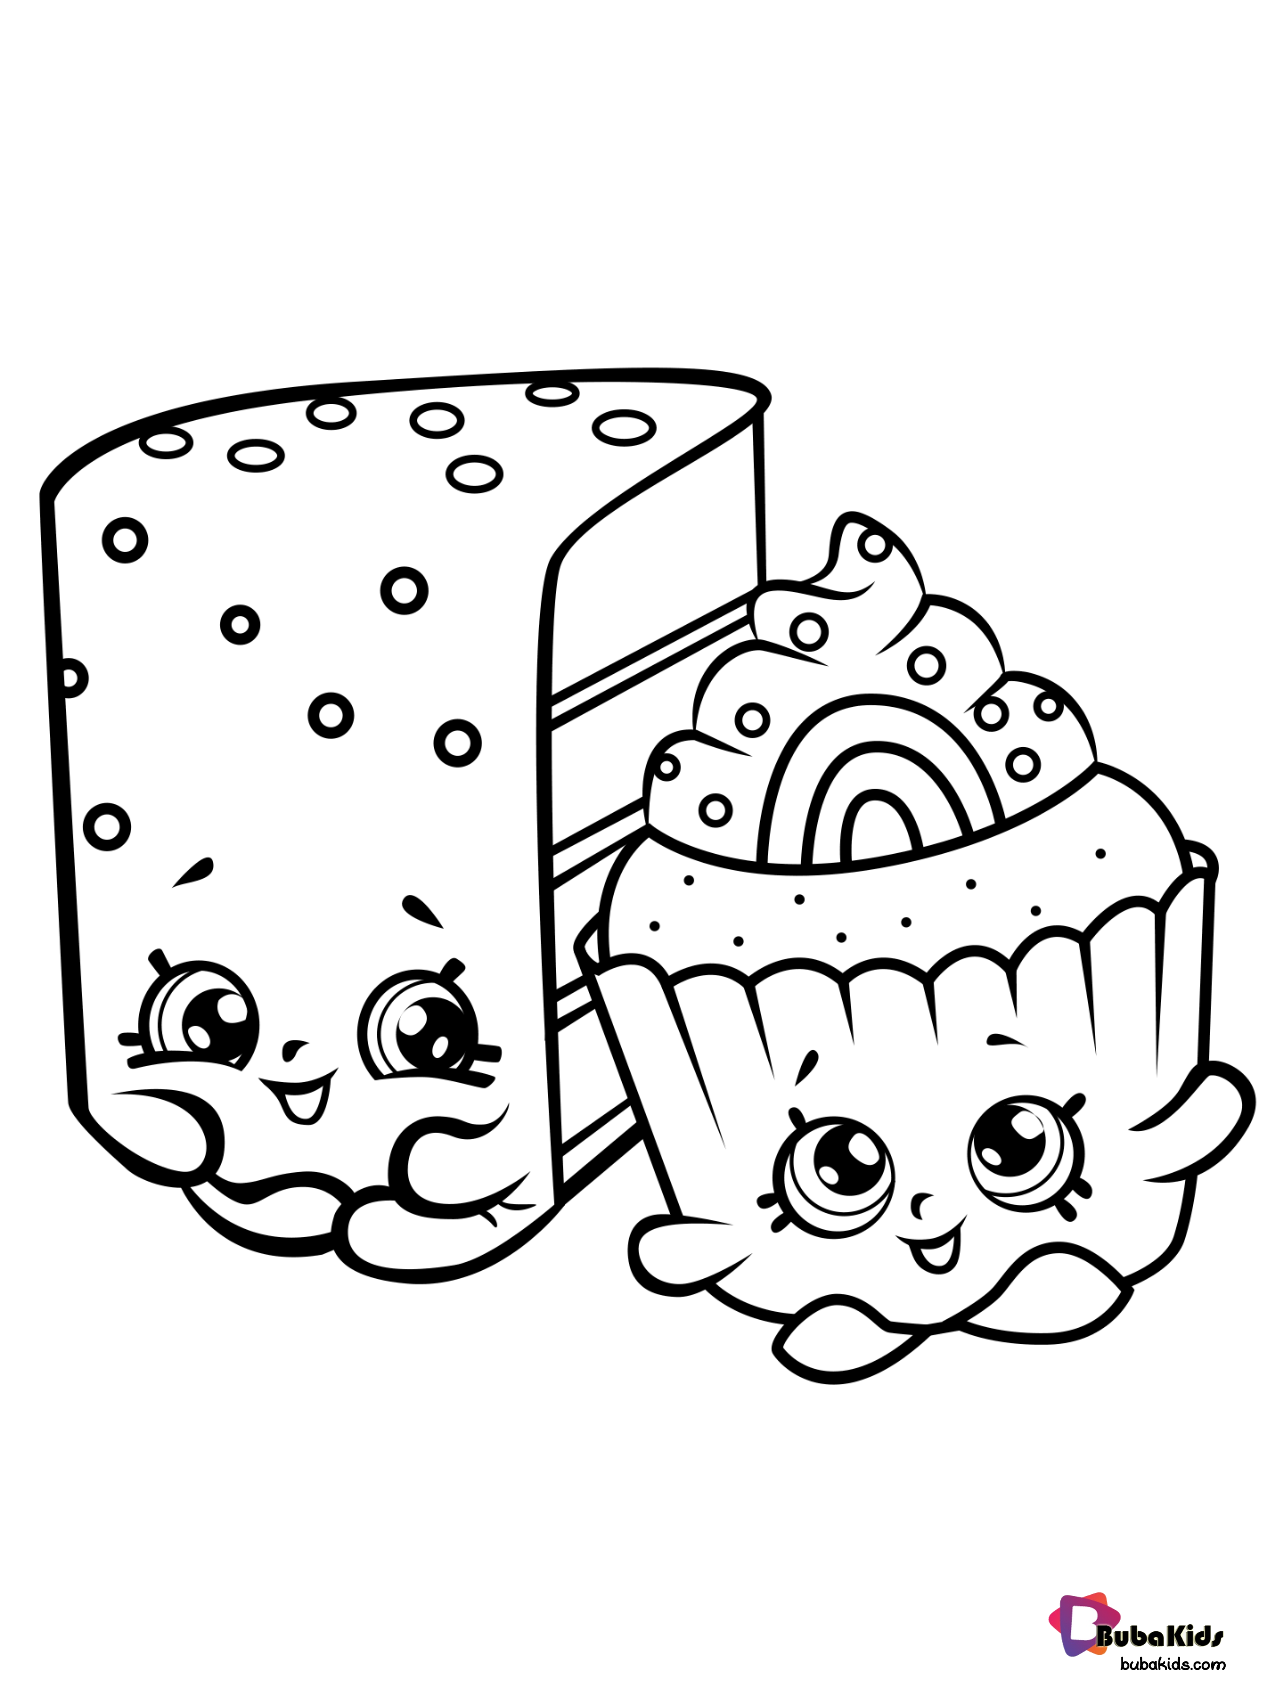 Free Shopkins Coloring Pages To Print And Color Collection Of Car Shopkins Coloring P